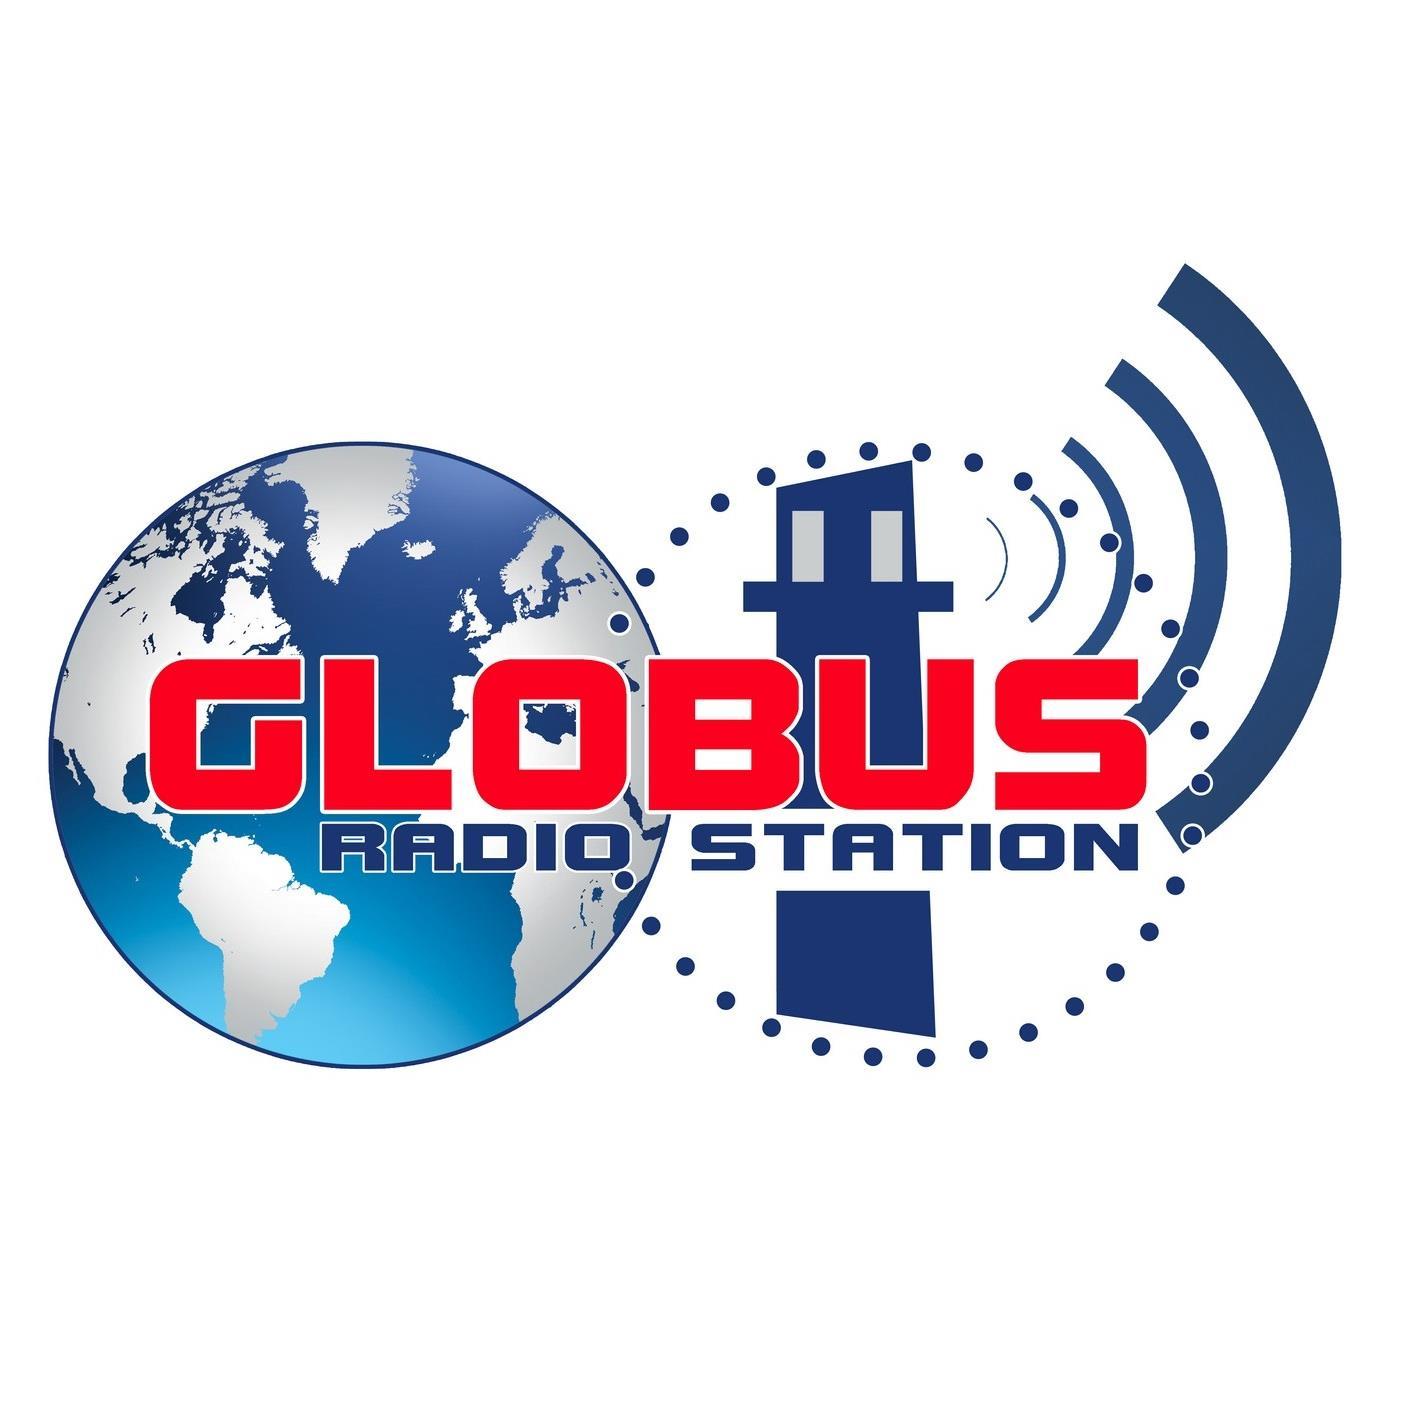 GLOBUS RADIO STATION 
THE INTERNATIONAL WEB NETWORK 
ON AIR ALL OVER THE WORLD SINCE 13th AUGUST 2013.